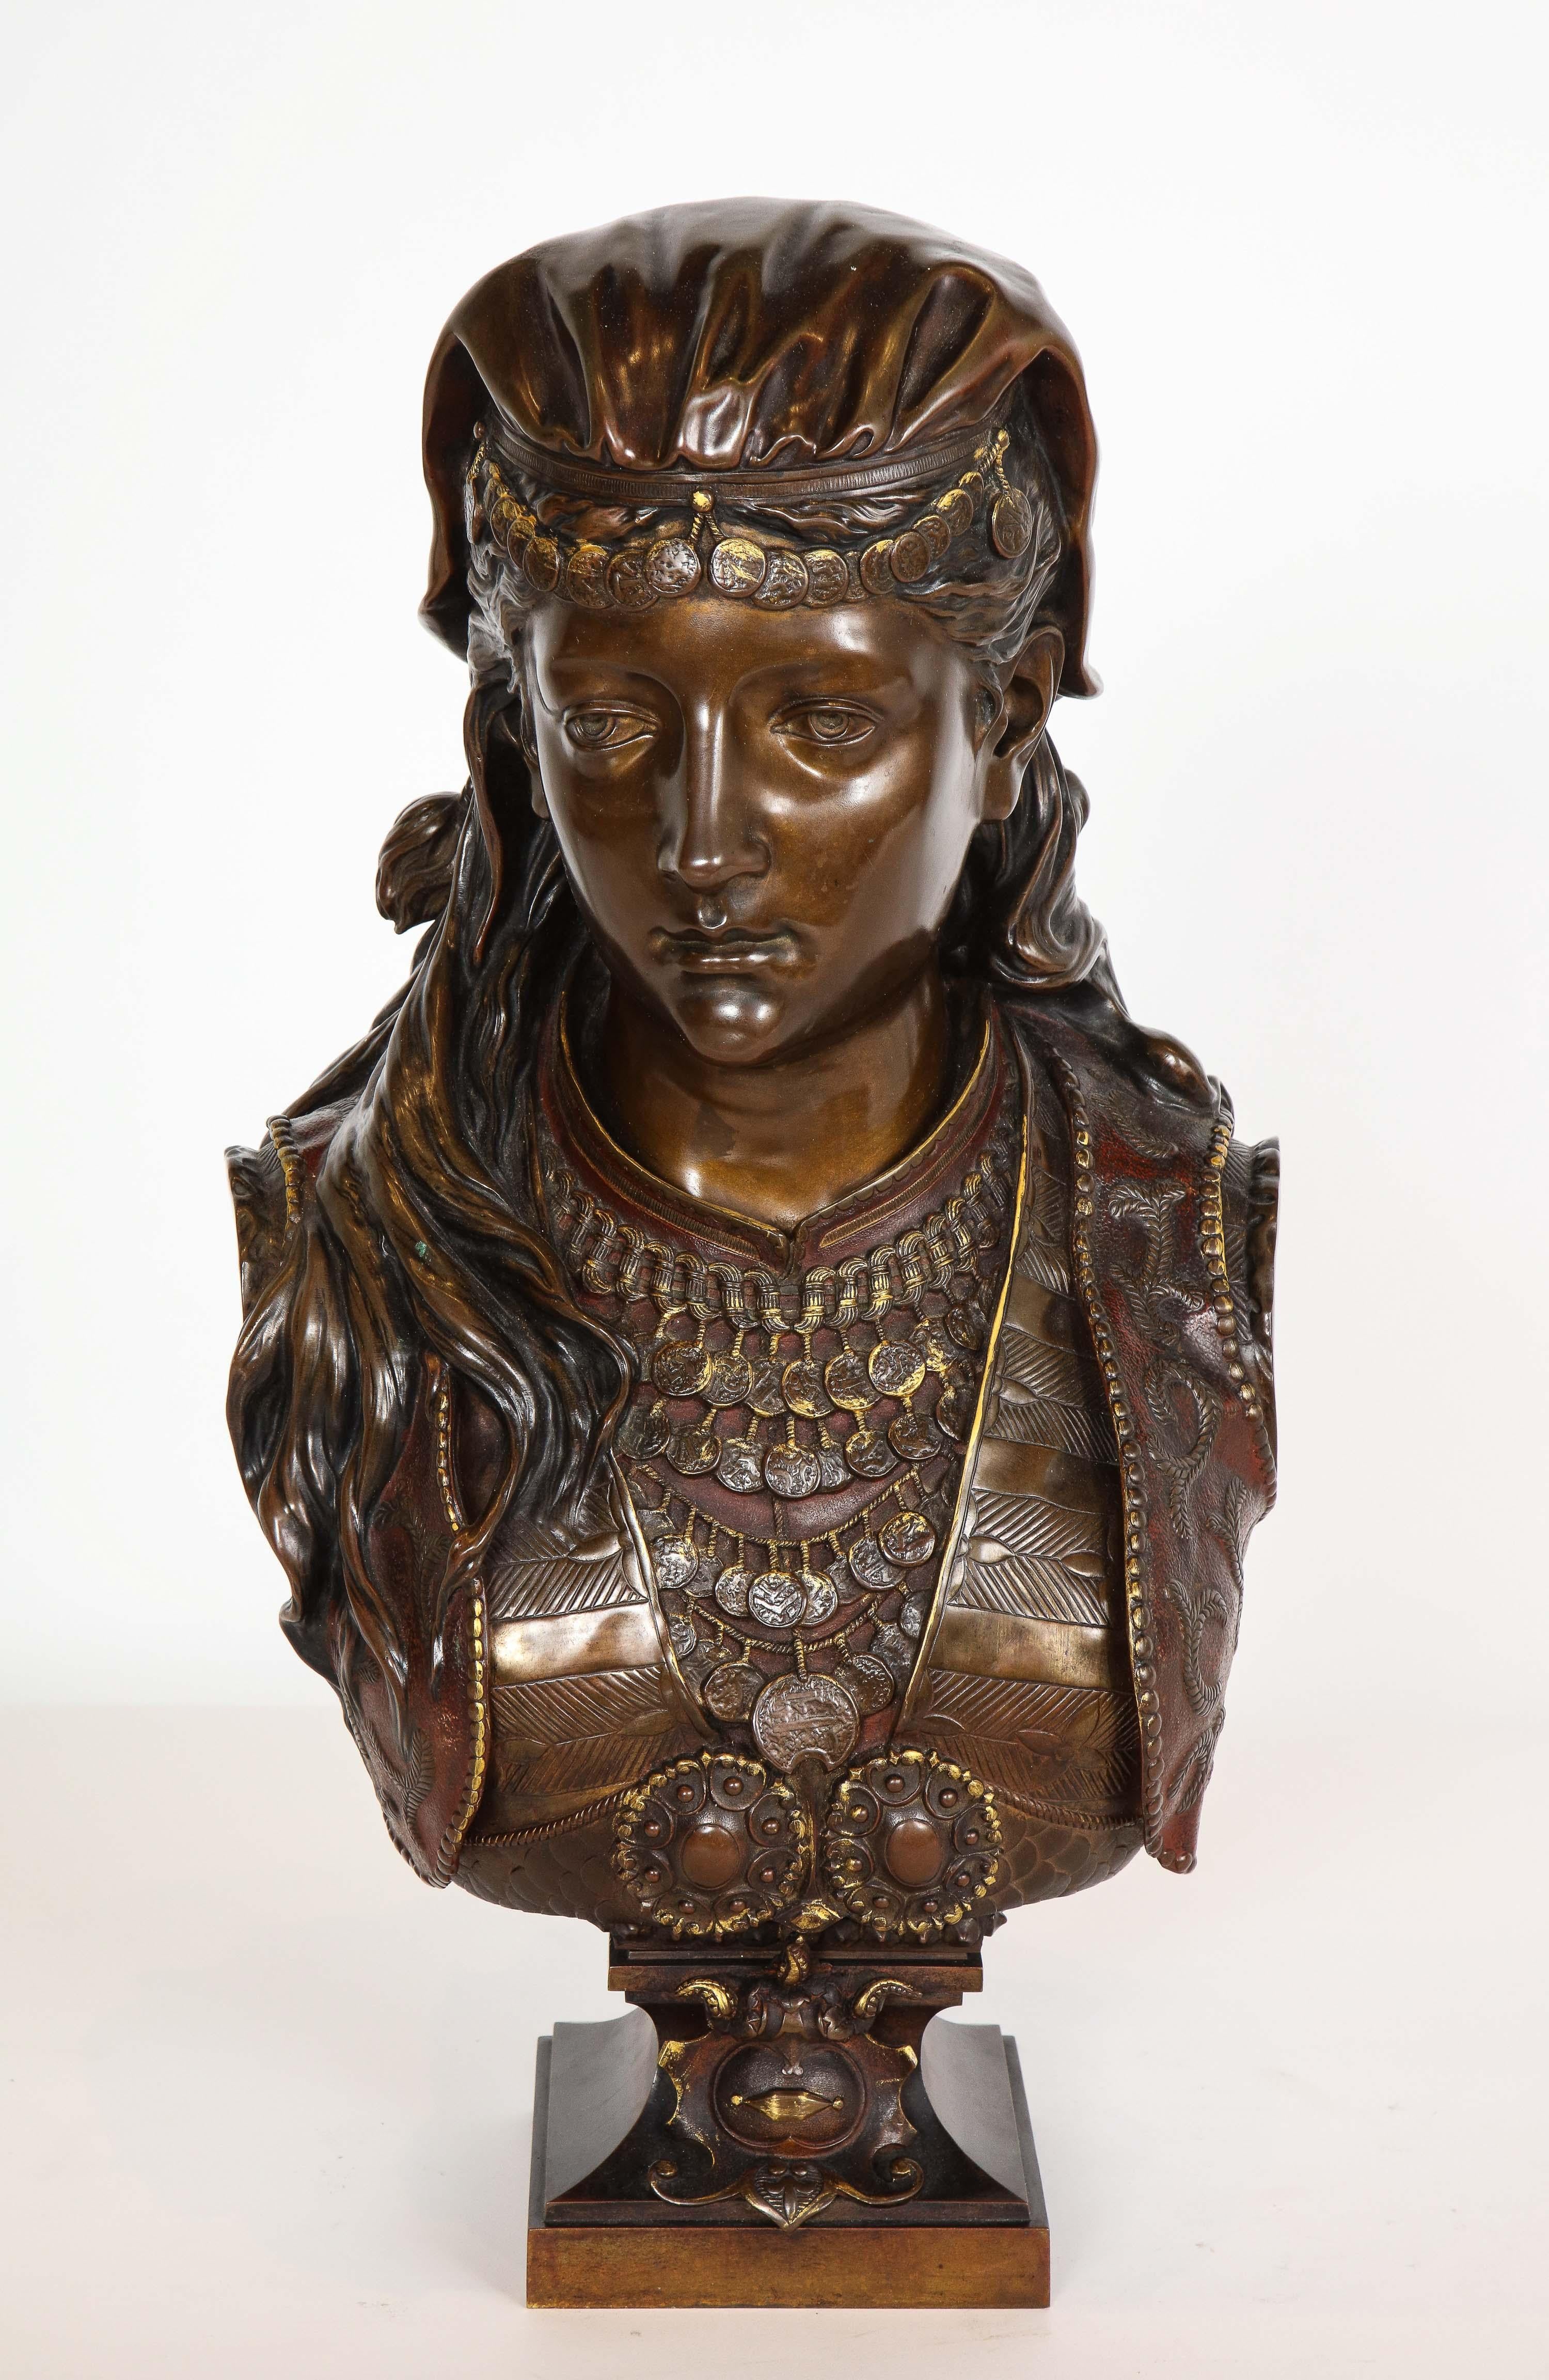 An exquisite French multi-patinated Orientalist bronze bust of a Turkish beauty, by Zacharie Rimbez, late 19th century.

Signed 'Z. Rimbez' (on the left shoulder)

Measures: 22